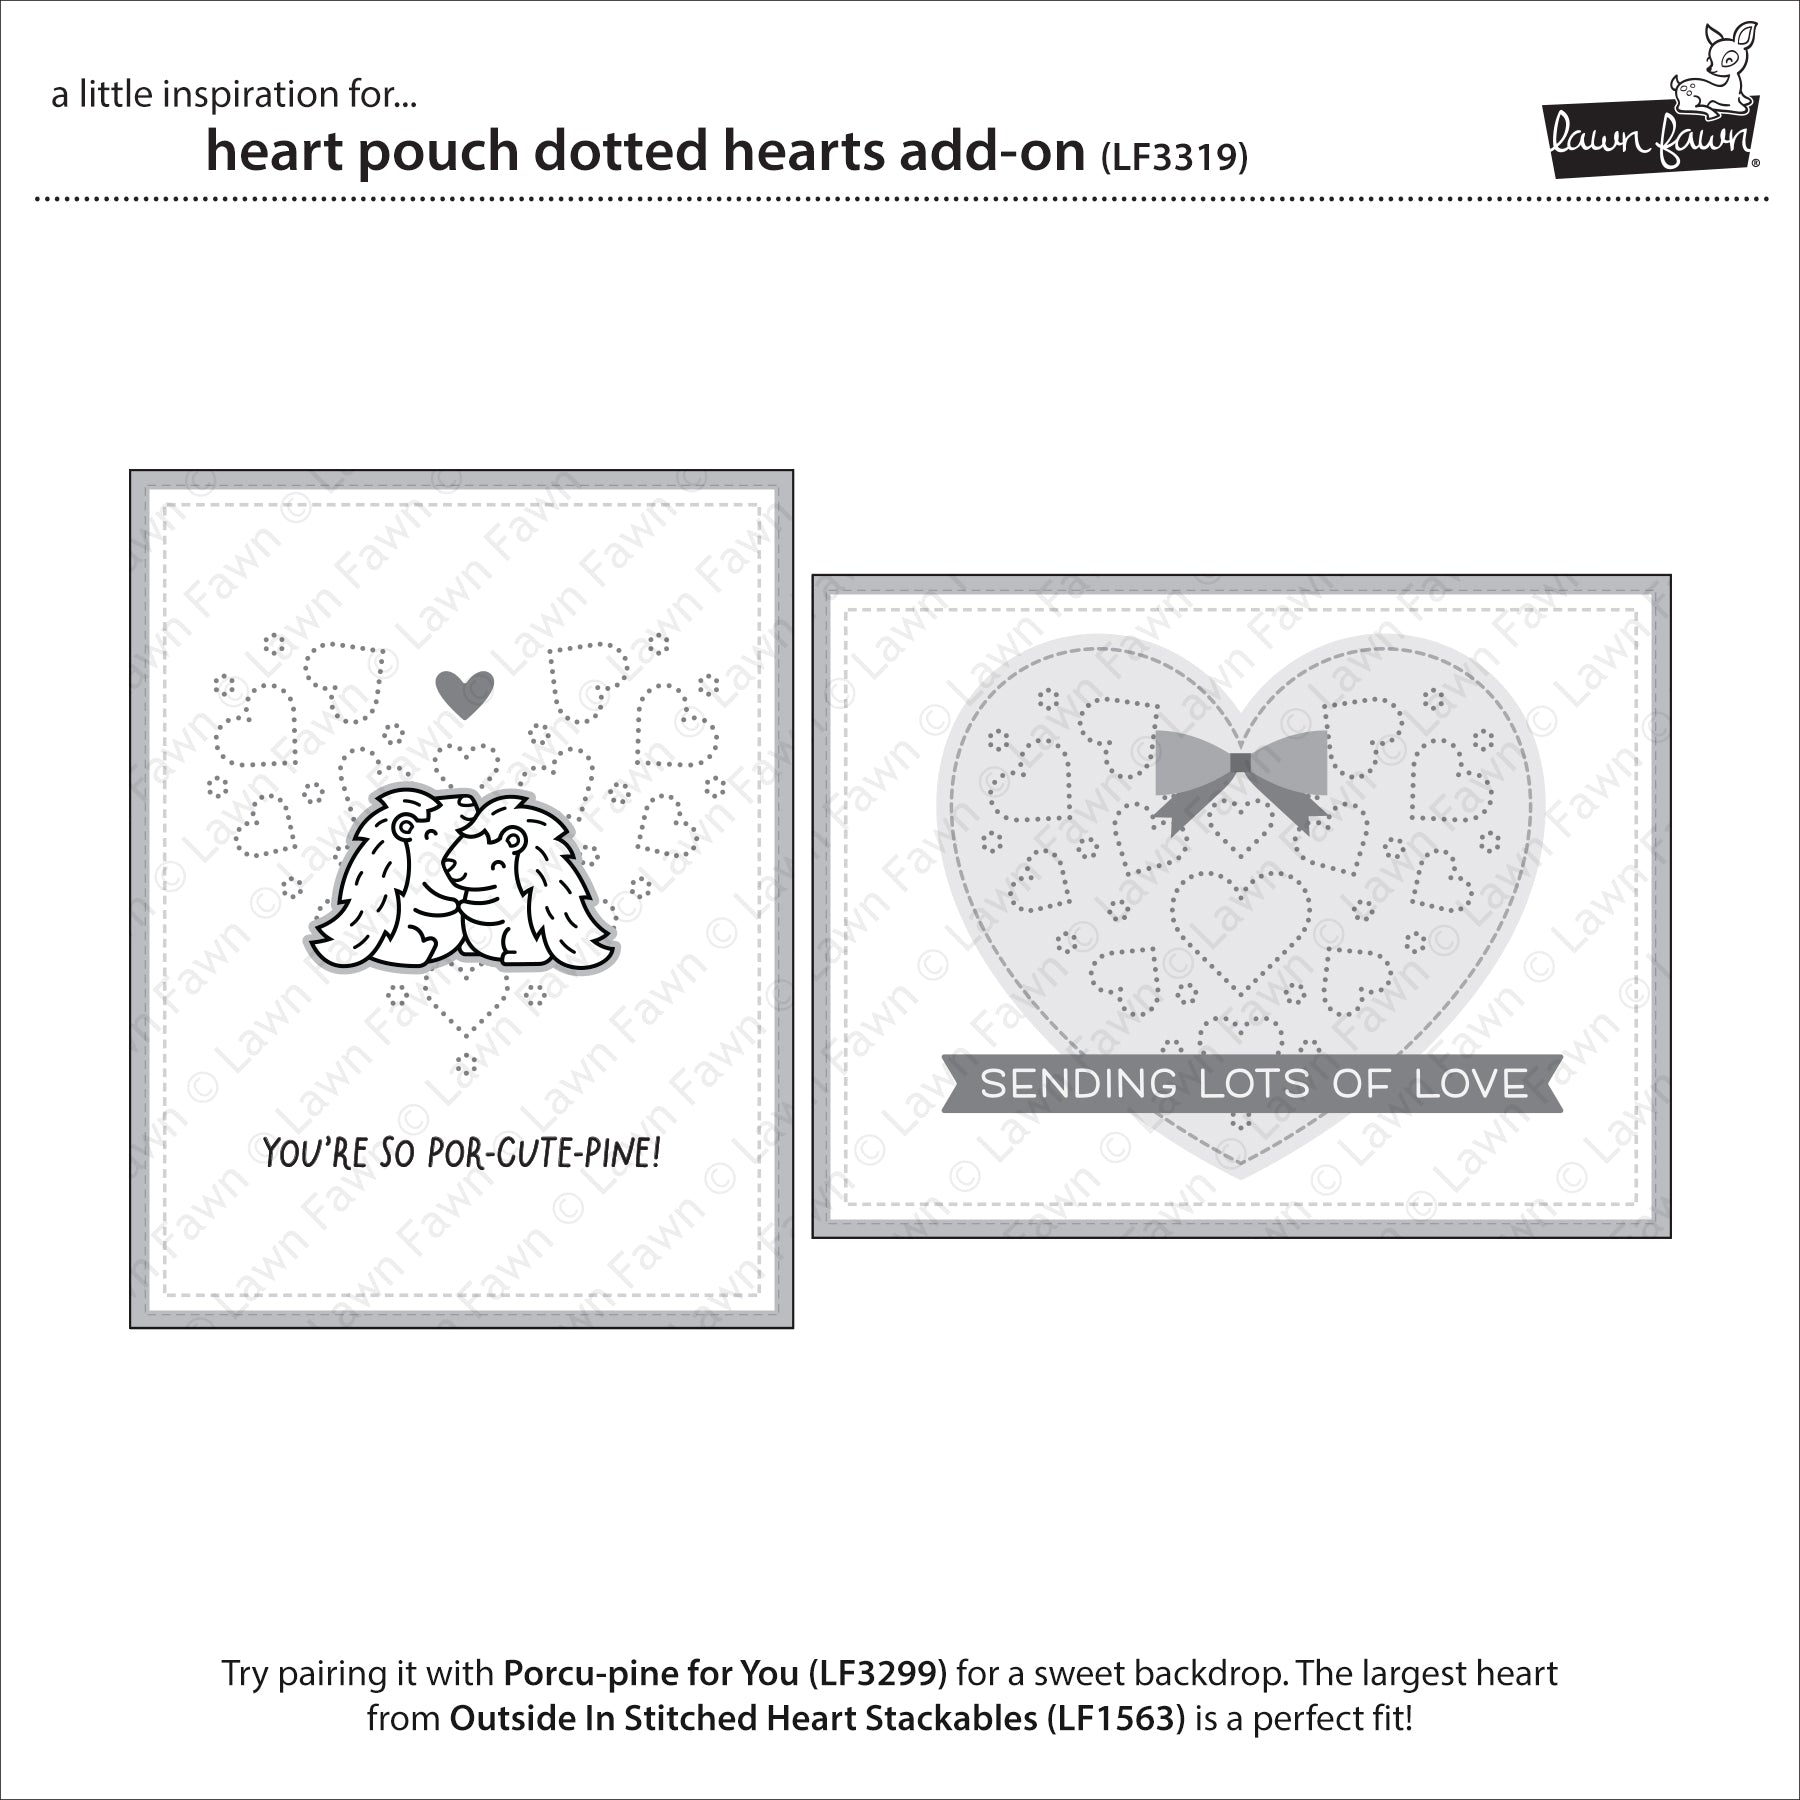 Lawn Fawn - Heart Pouch Dotted Hearts Add-On Die